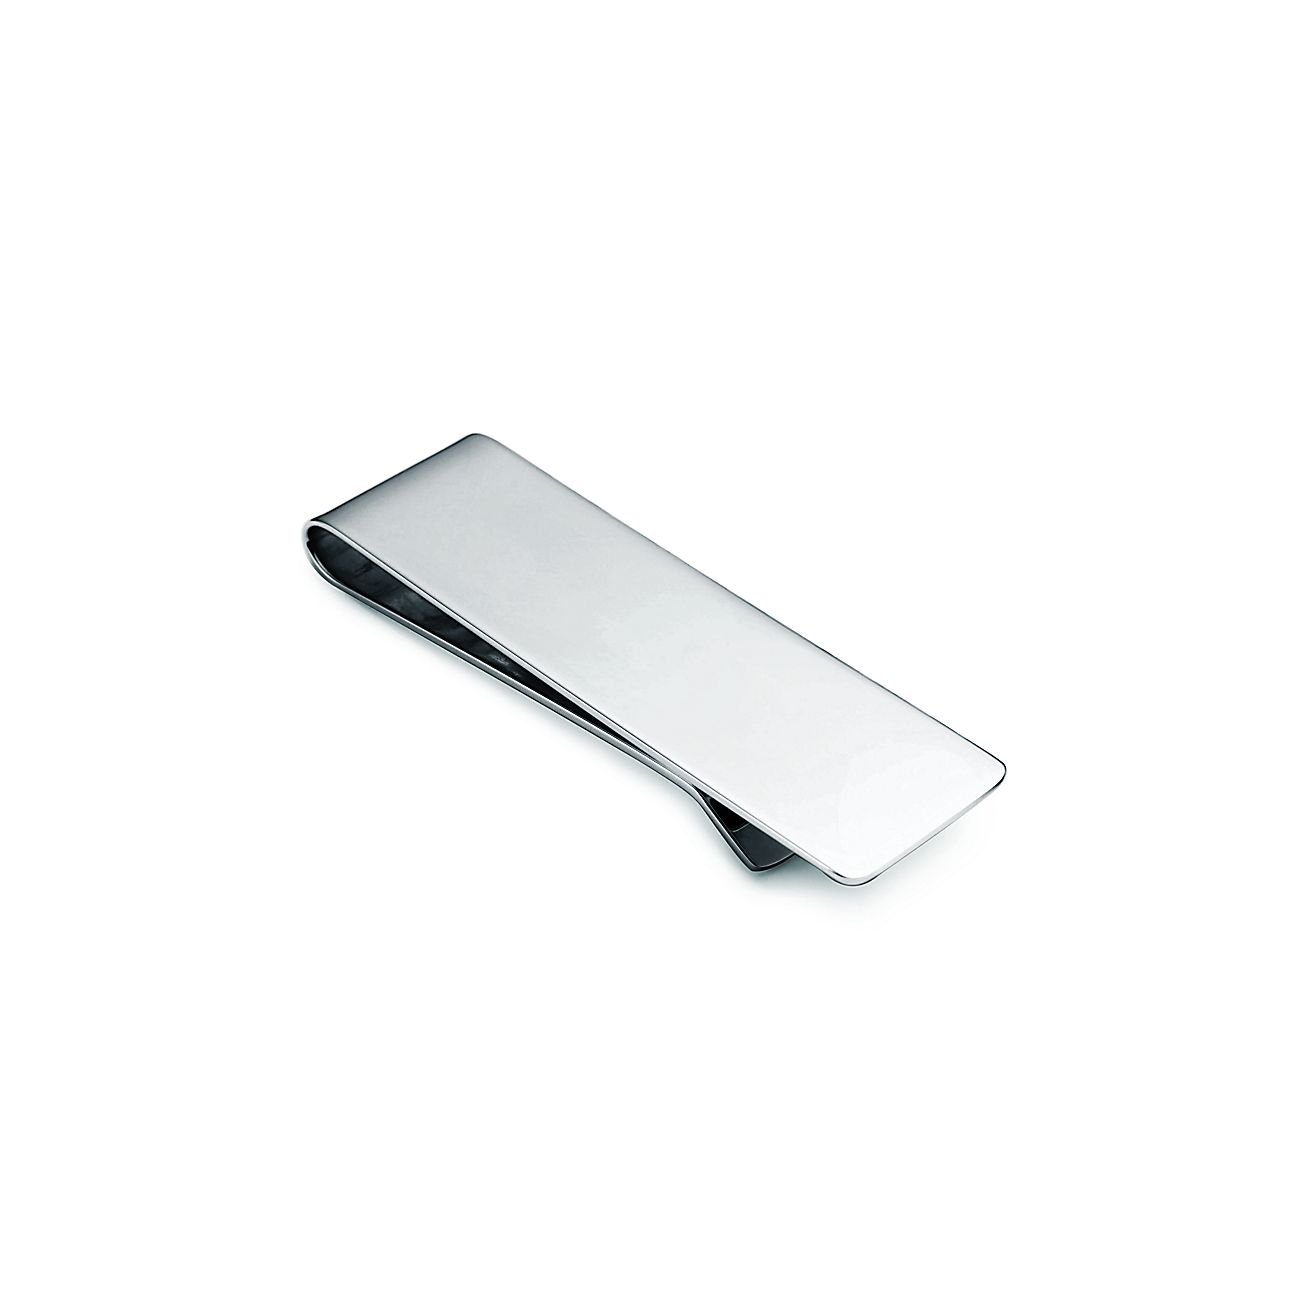 Tiffany Classic money clip in sterling silver.